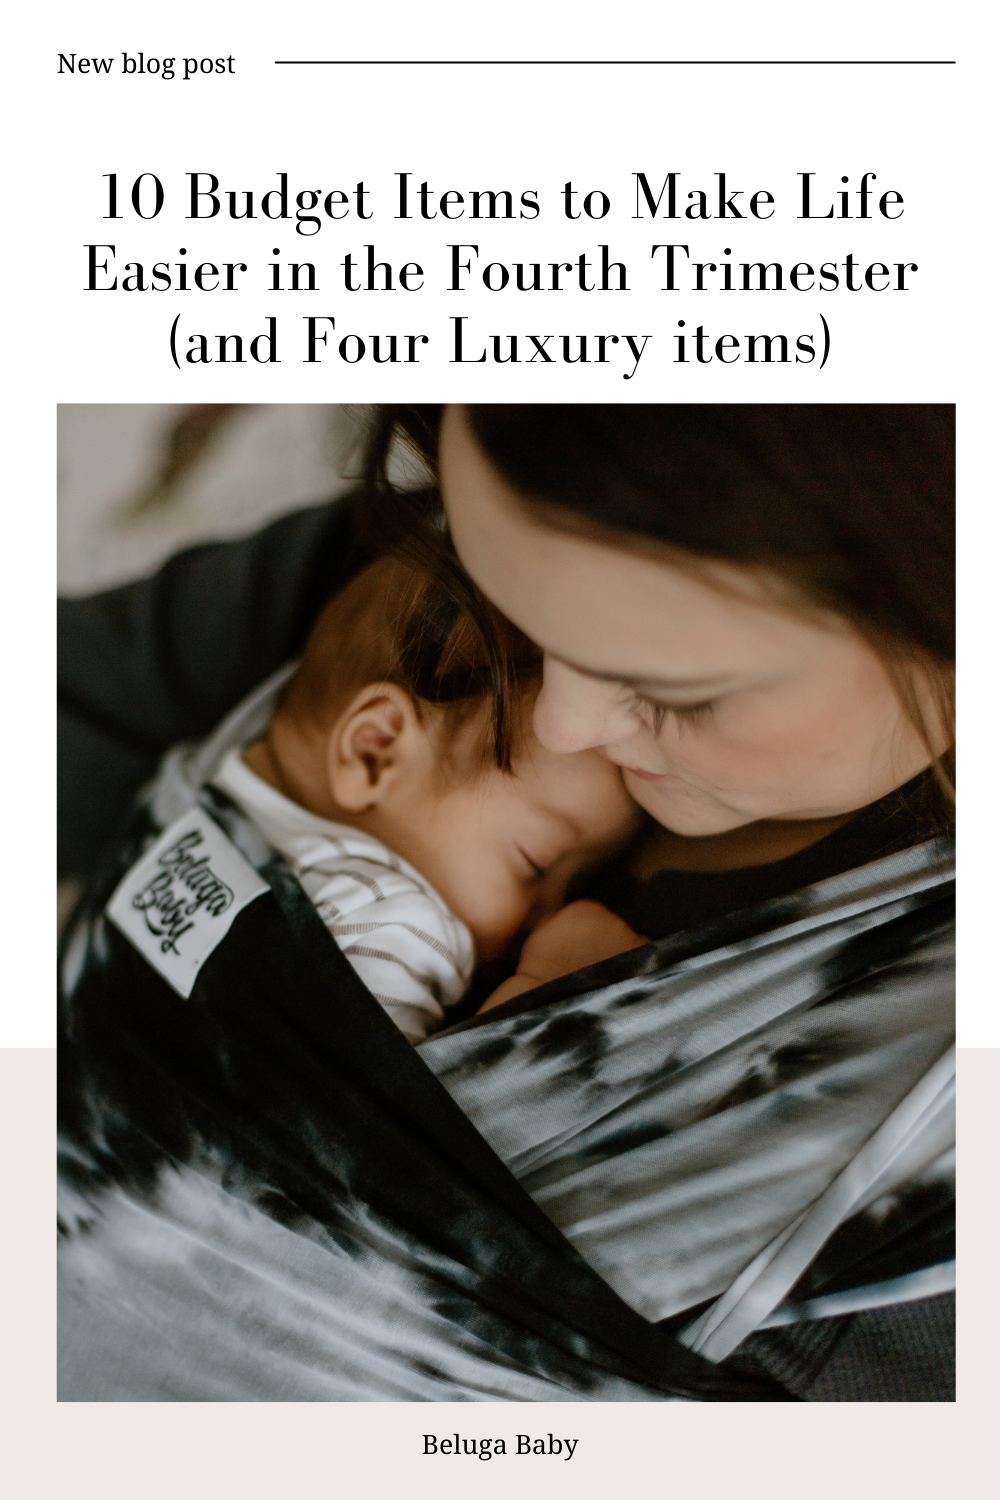 10 Budget Items to Make Life Easier in the Fourth Trimester (and Four Luxury items)